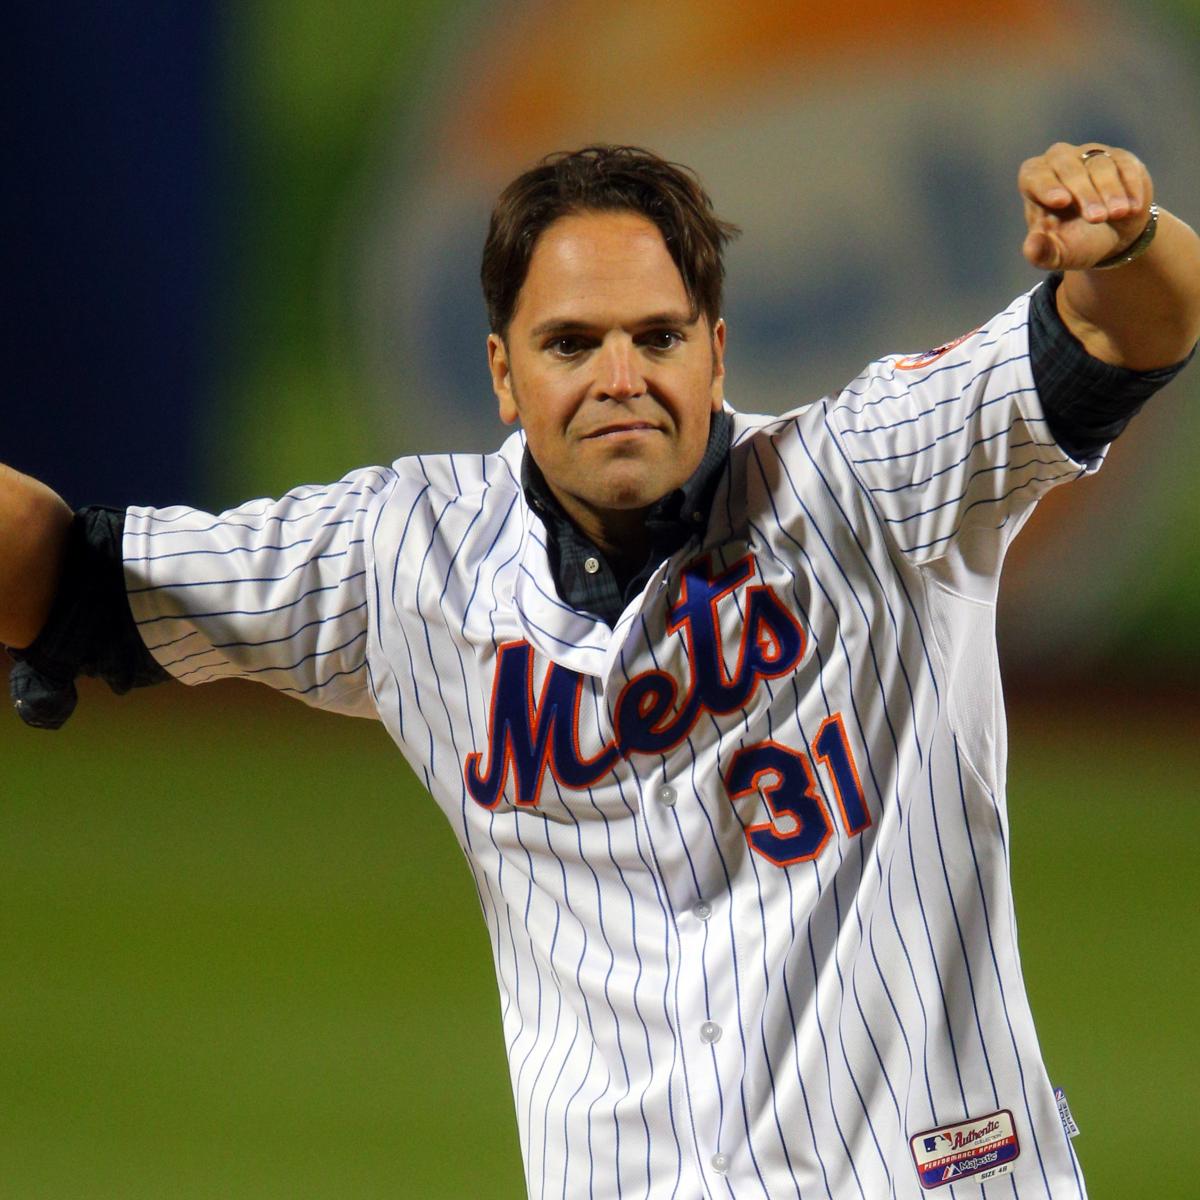 Mike Piazza, NY Mets feel obligation to honor 9/11 victims